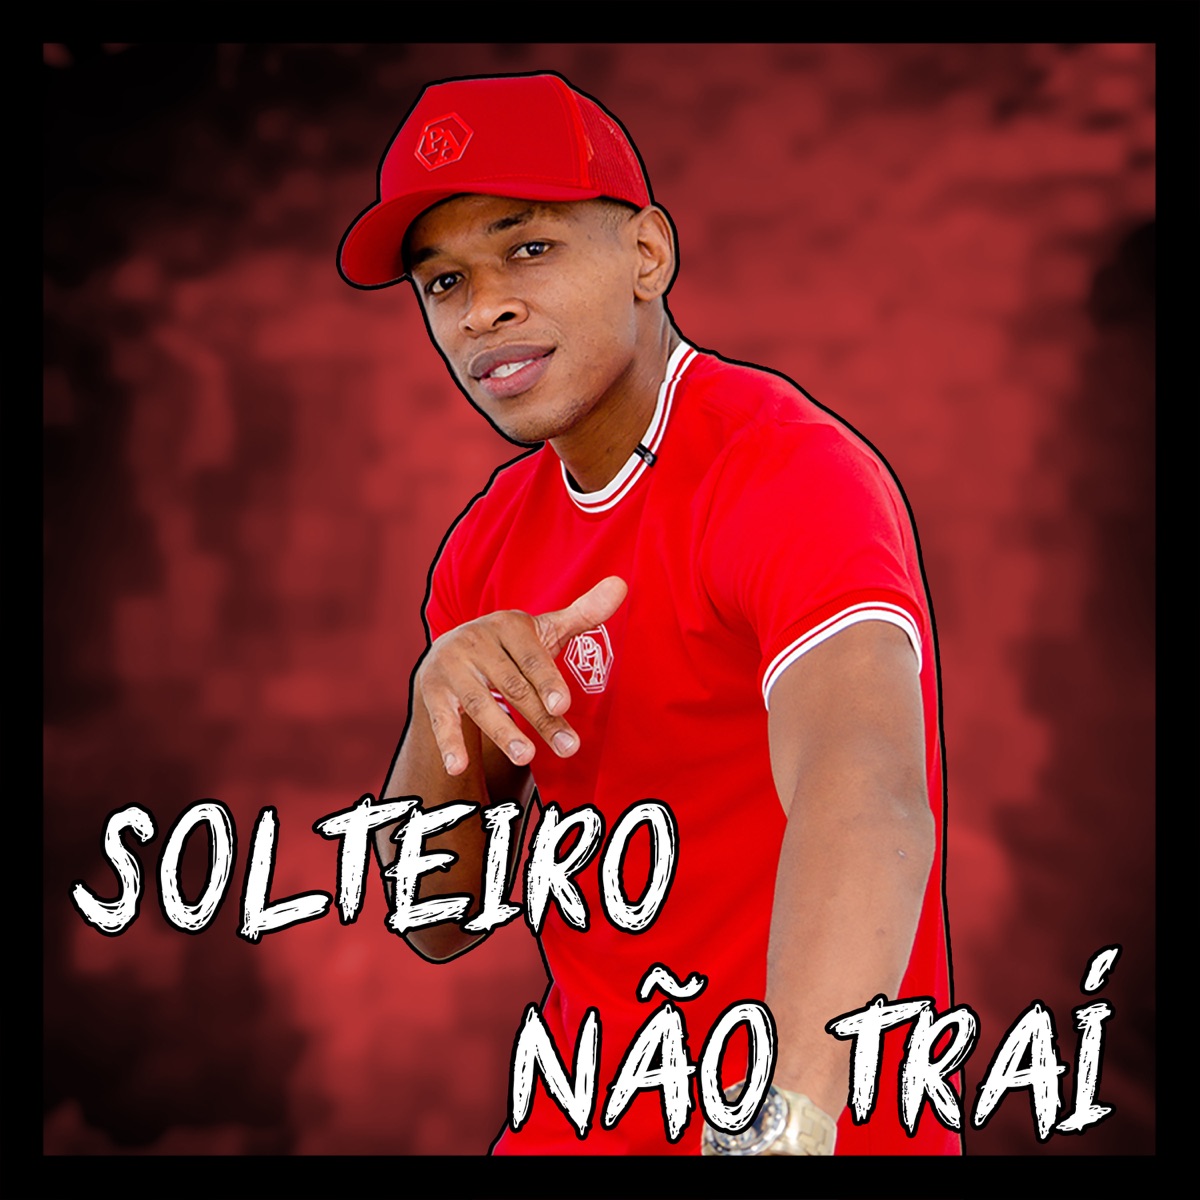 TROPA DO CALVO – Song by BXNFXM – Apple Music